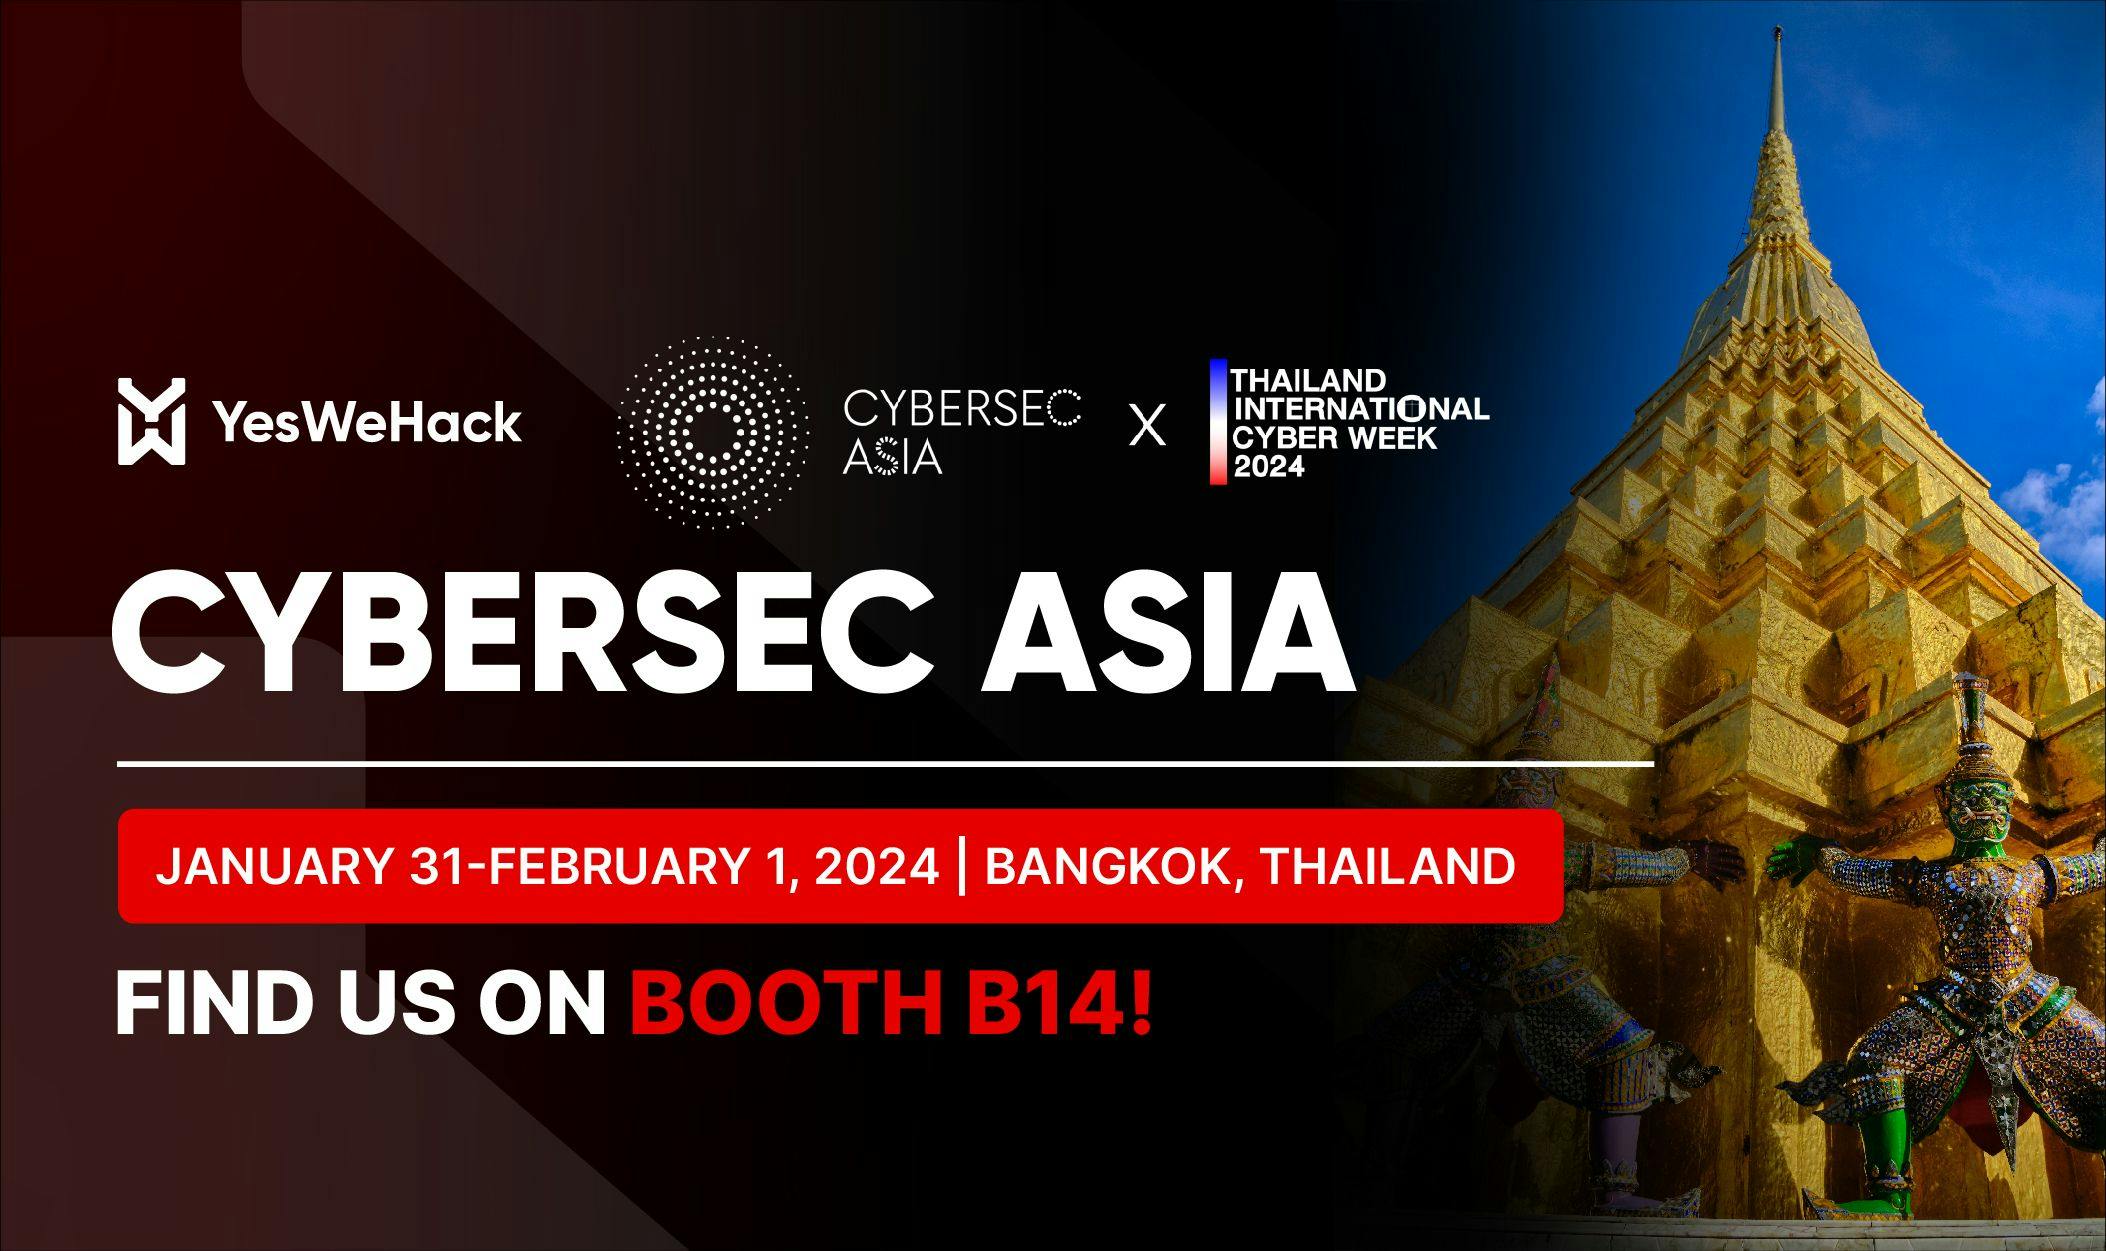 YesWeHack will be exhibiting at Cybersec Asia in Bangkok